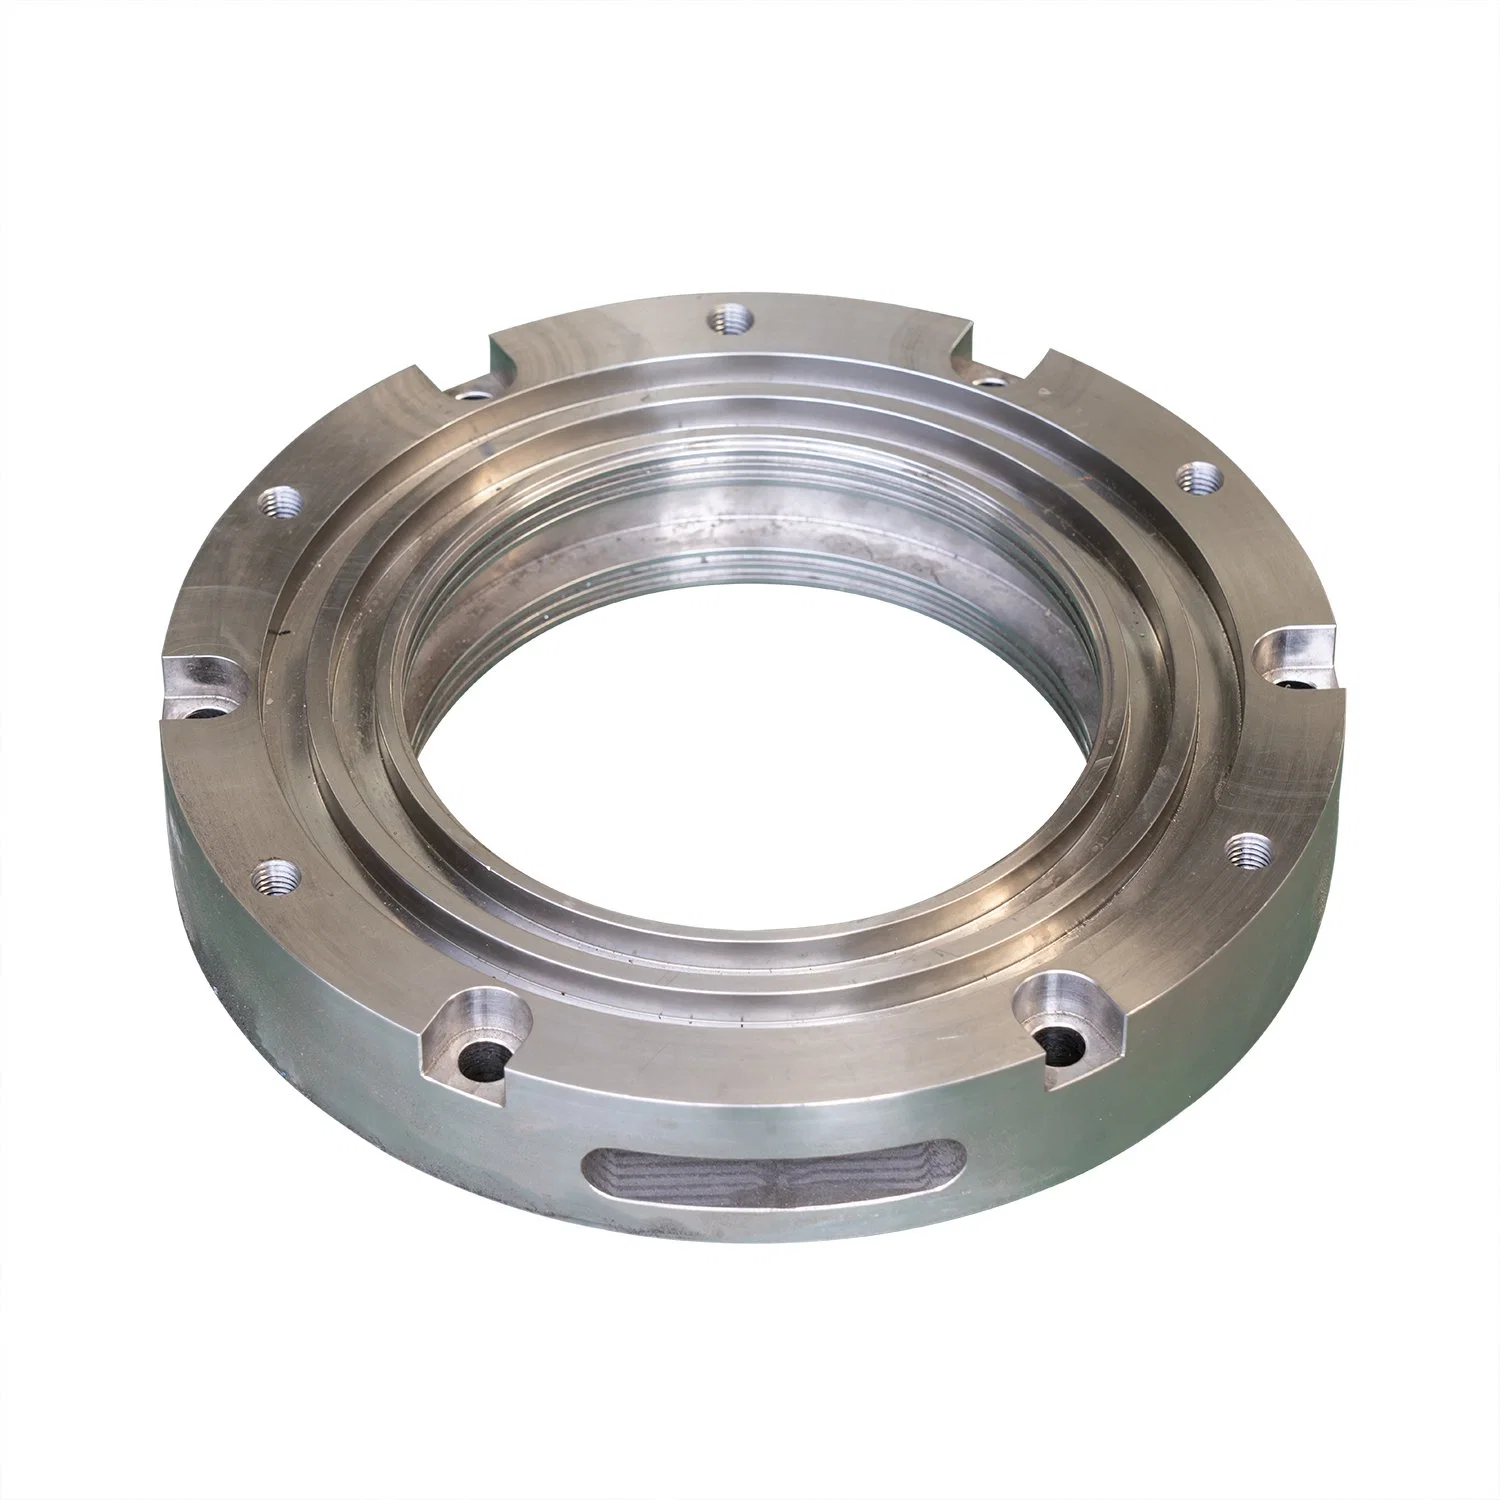 Customized Stainless Steel Flange Forging Centrifugal Pump Flange,